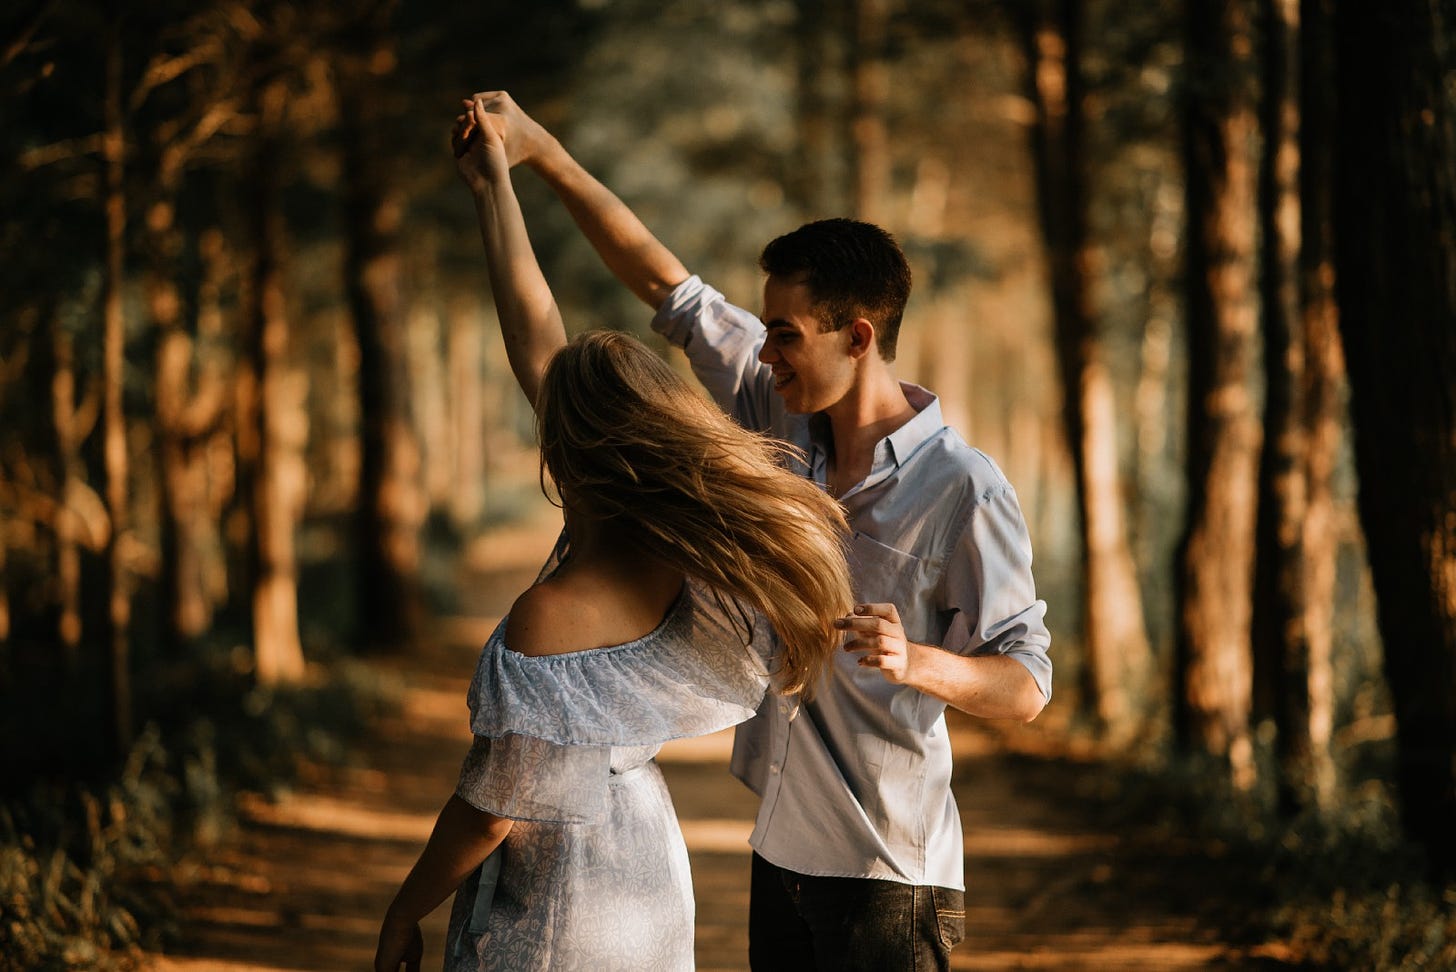 A man and a woman dance in the woods. The man is spinning the woman and smiling. The woman’s hair is drifting in the wind.